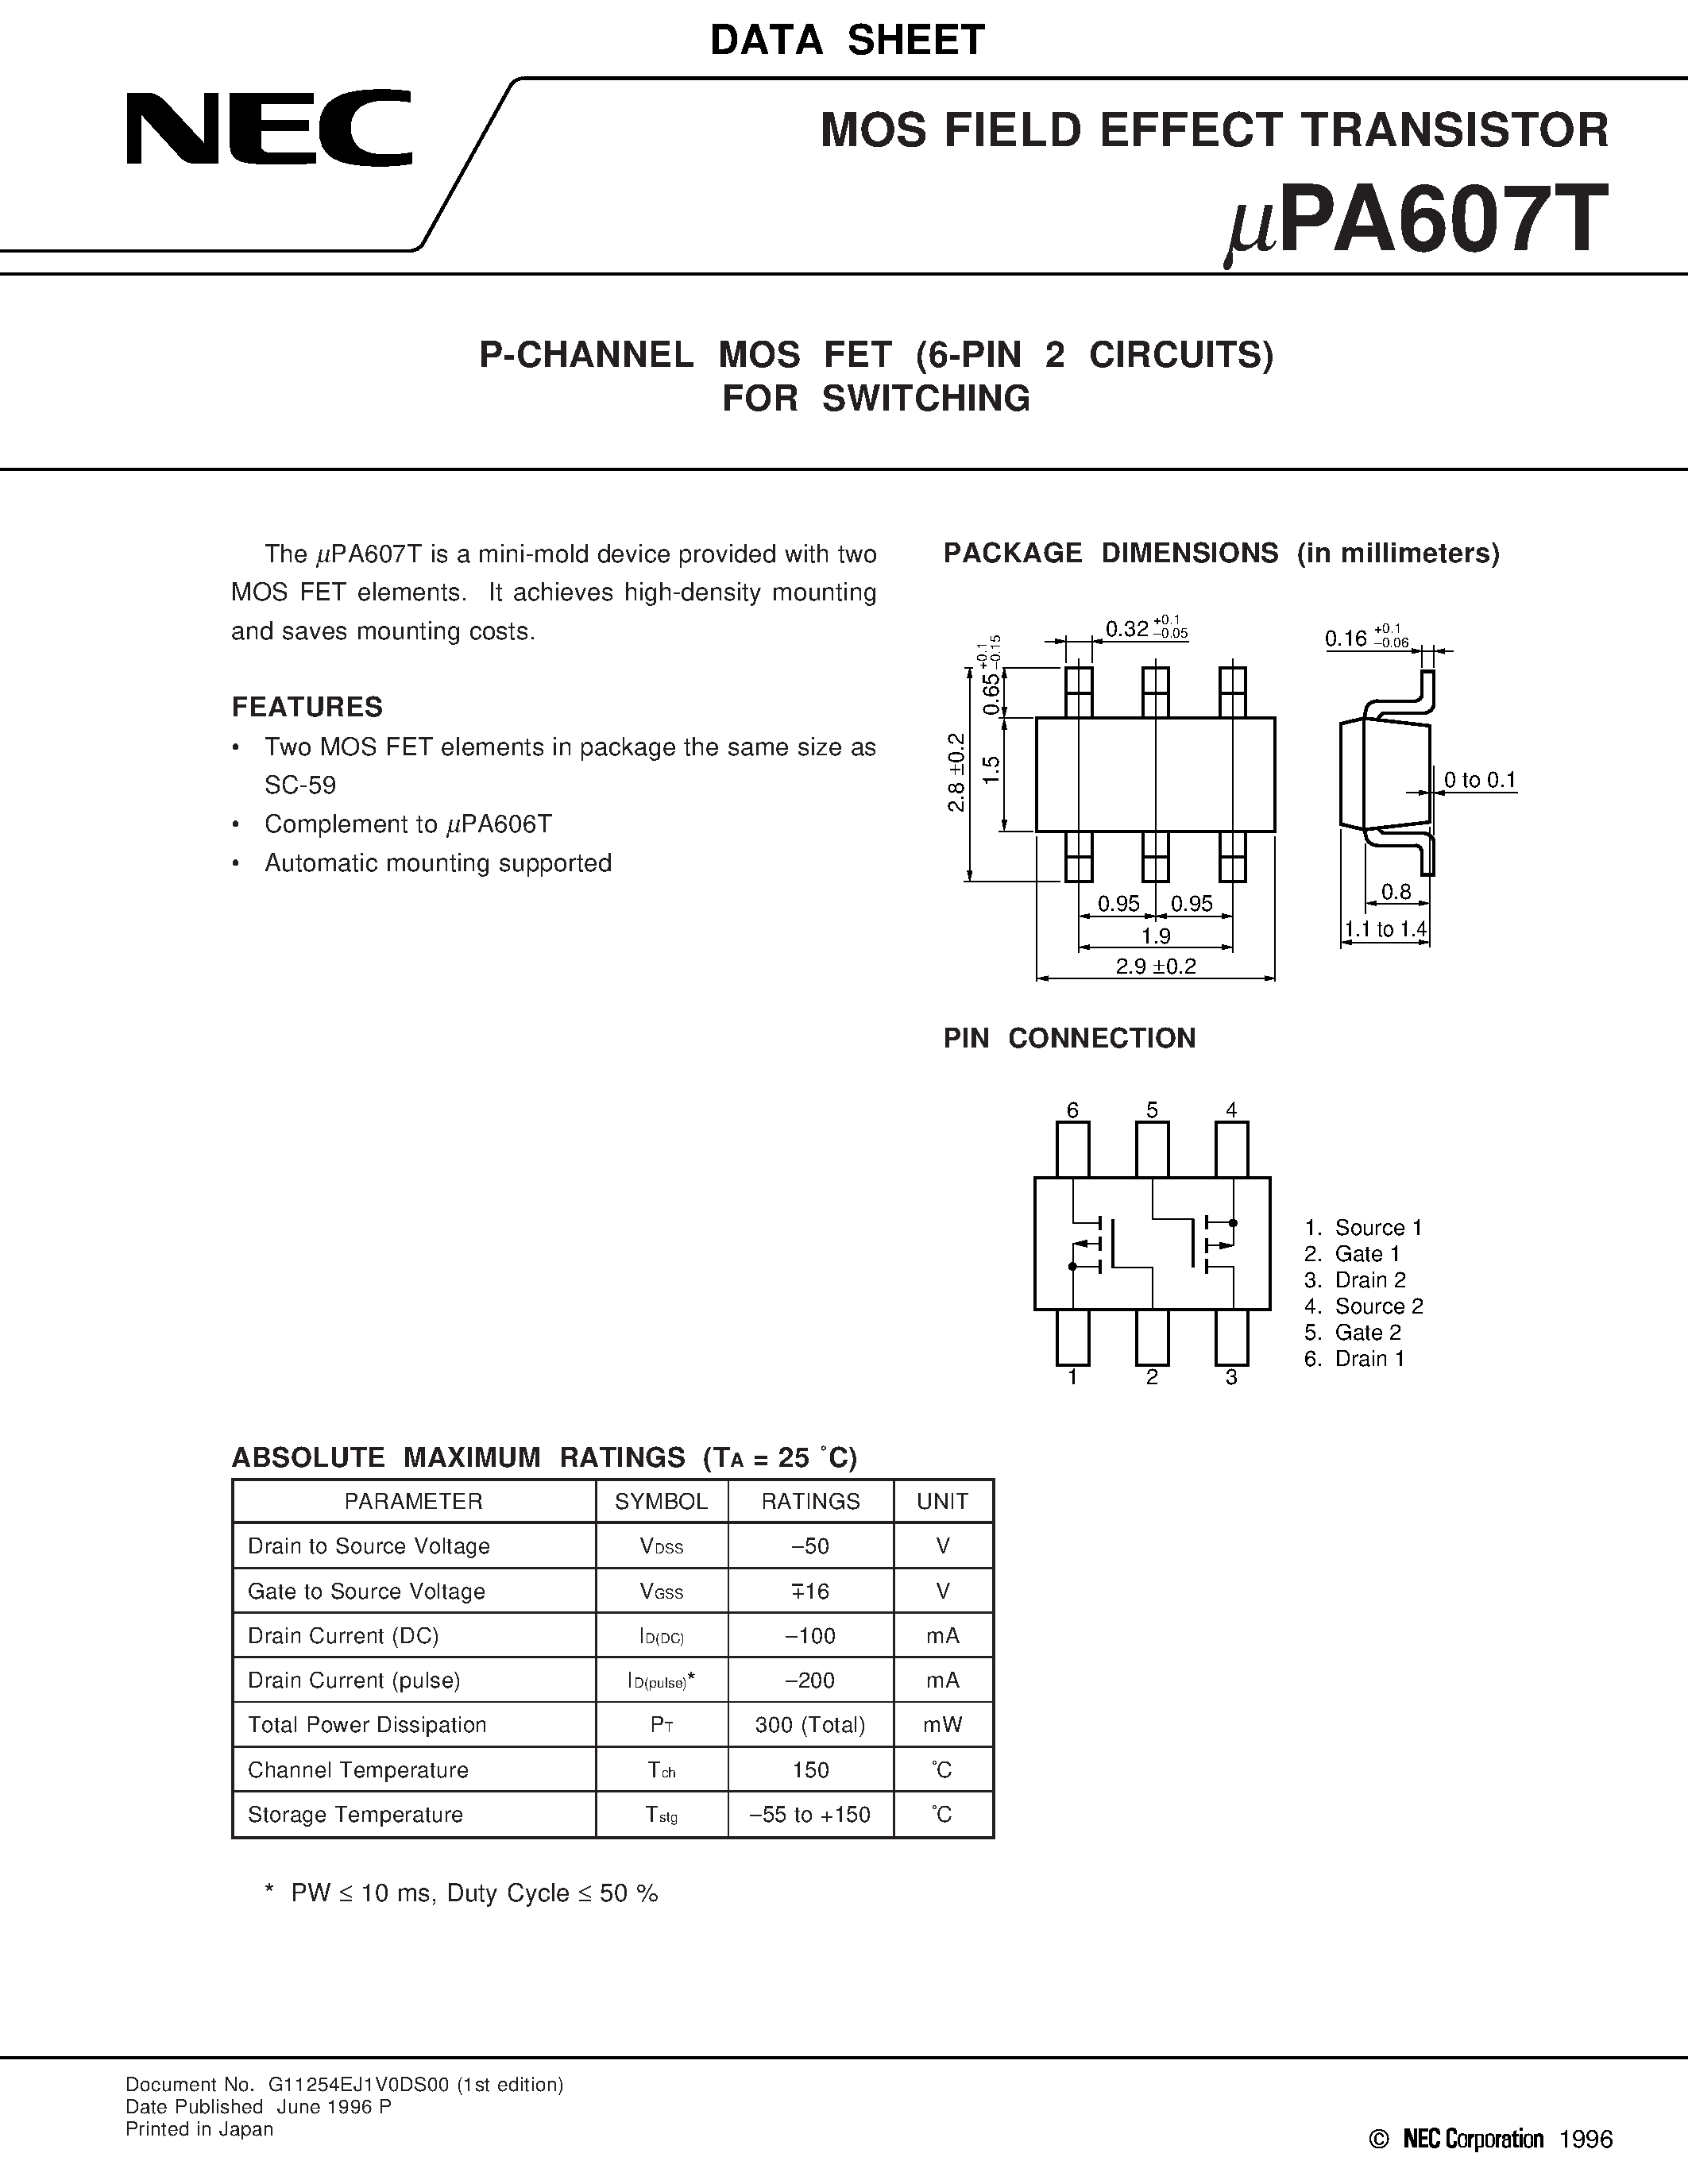 Даташит UPA607 - P-CHANNEL MOS FET 6-PIN 2 CIRCUITS FOR SWITCHING страница 1